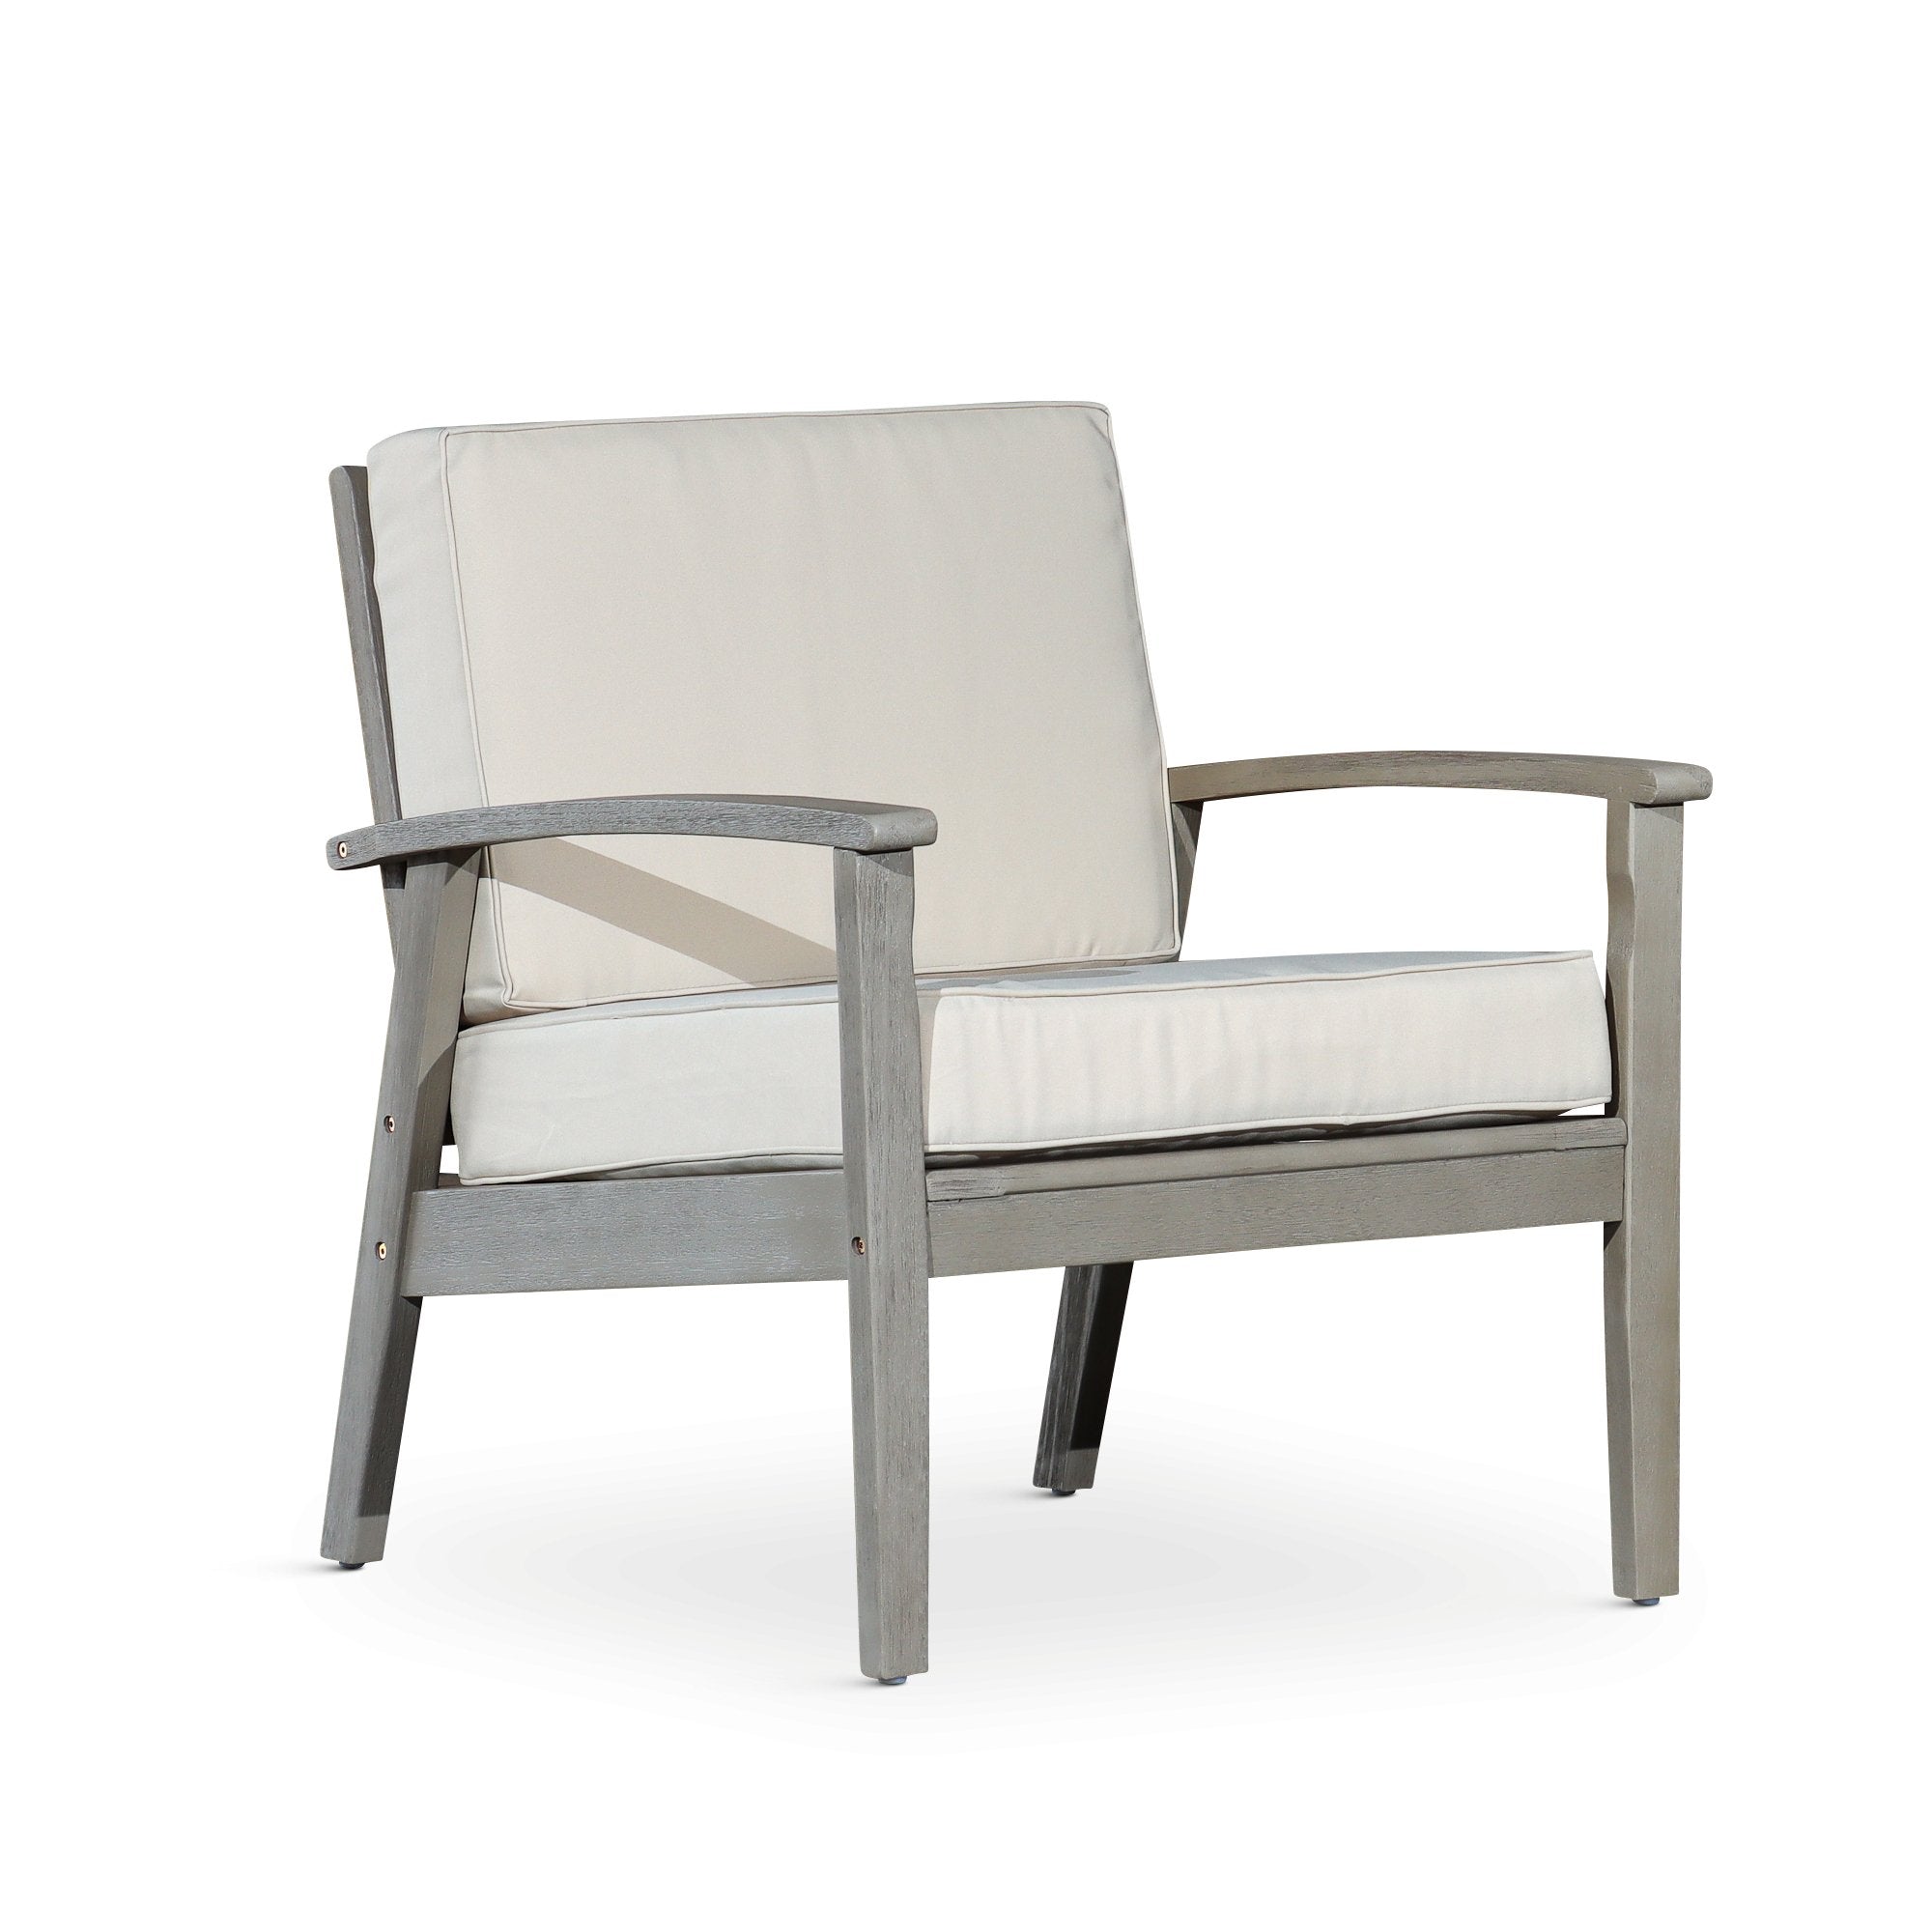 Outdoor-Deep-Seat-Chair,-Driftwood-Gray-Finish,-Sand-Cushions-Outdoor-Chairs